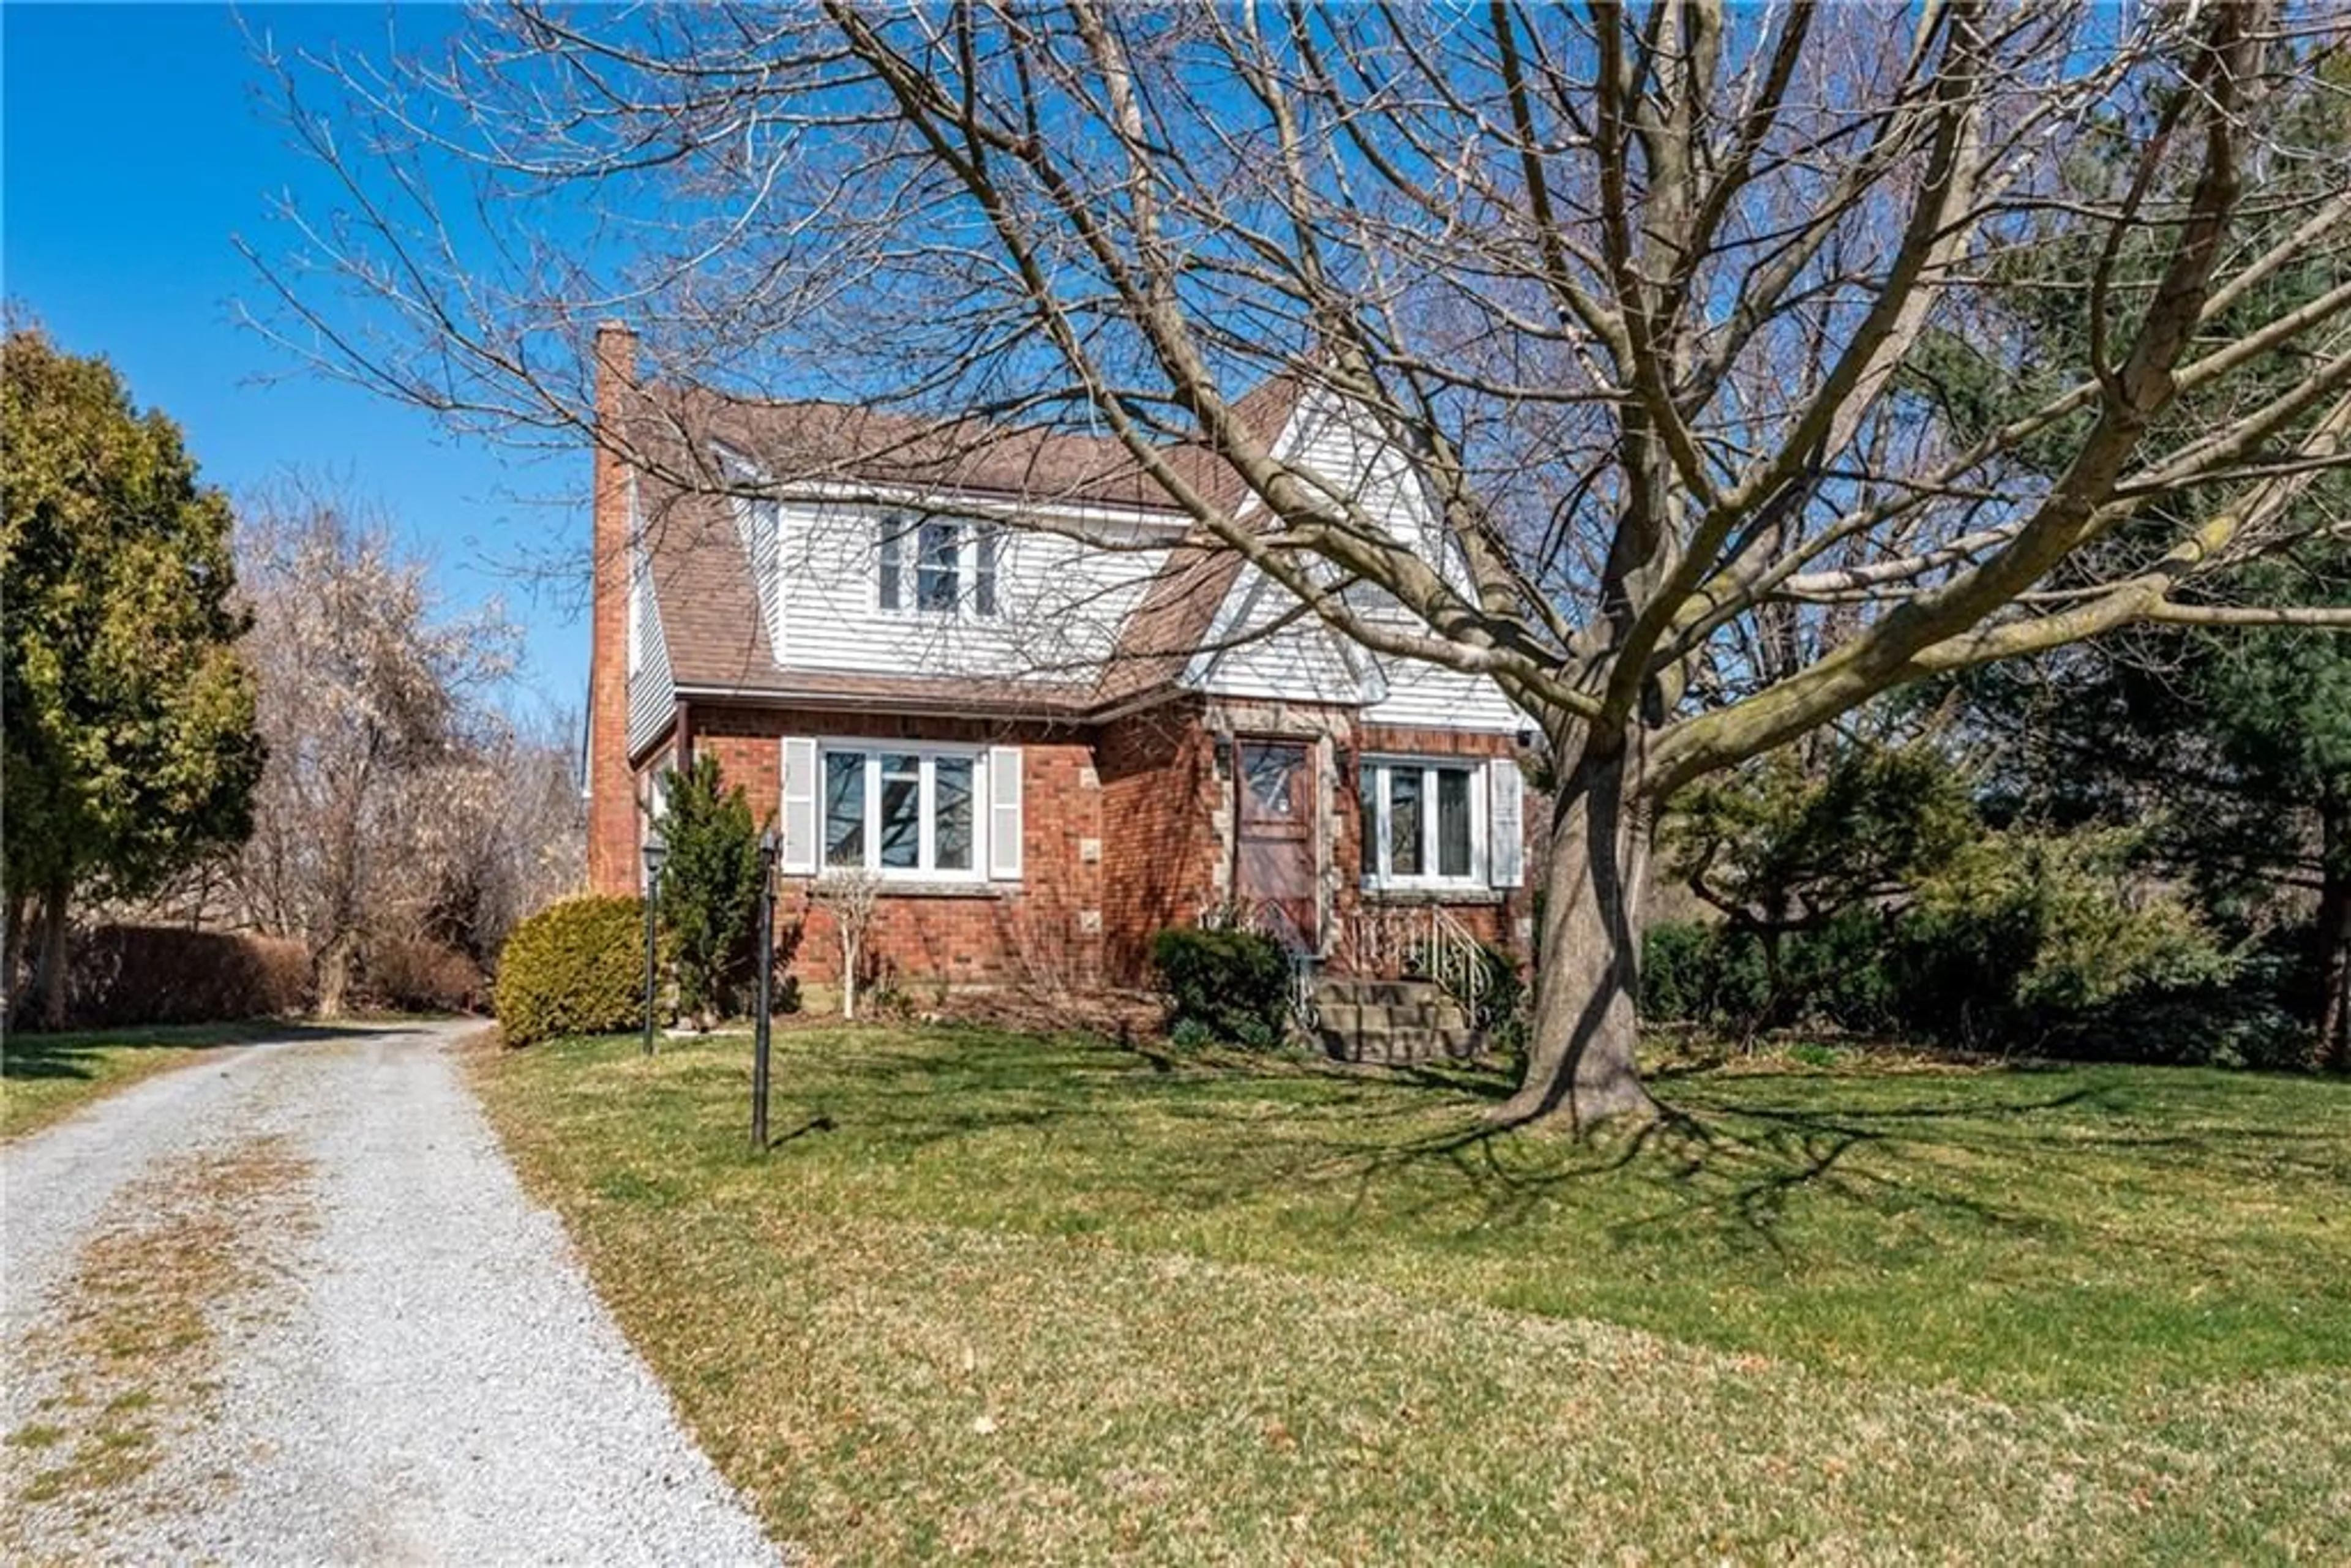 Cottage for 810 Lakeshore Rd, Niagara-on-the-Lake Ontario L0S 1J0